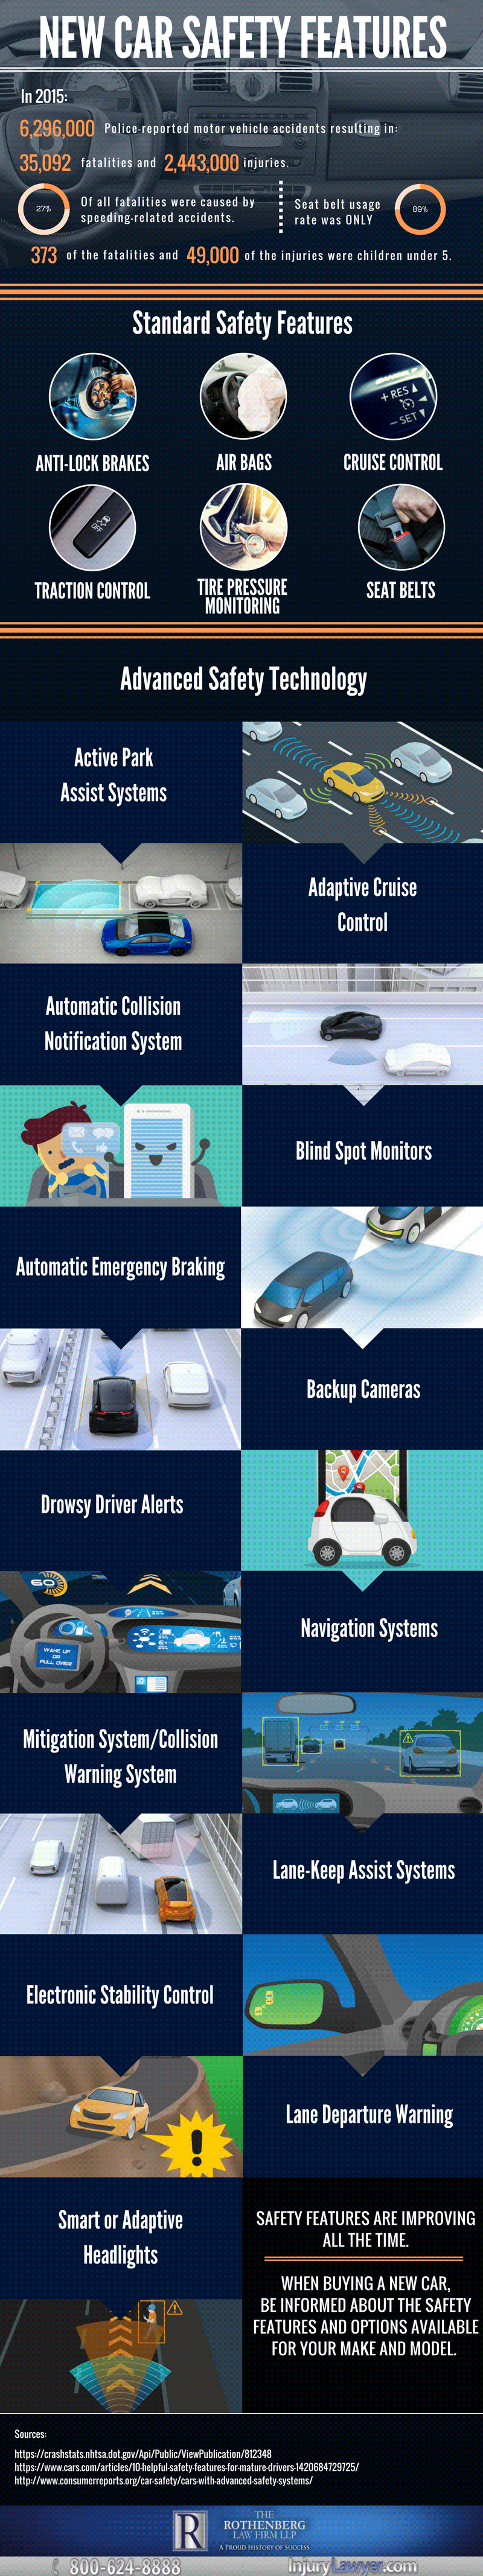 New car safety features Visual.ly